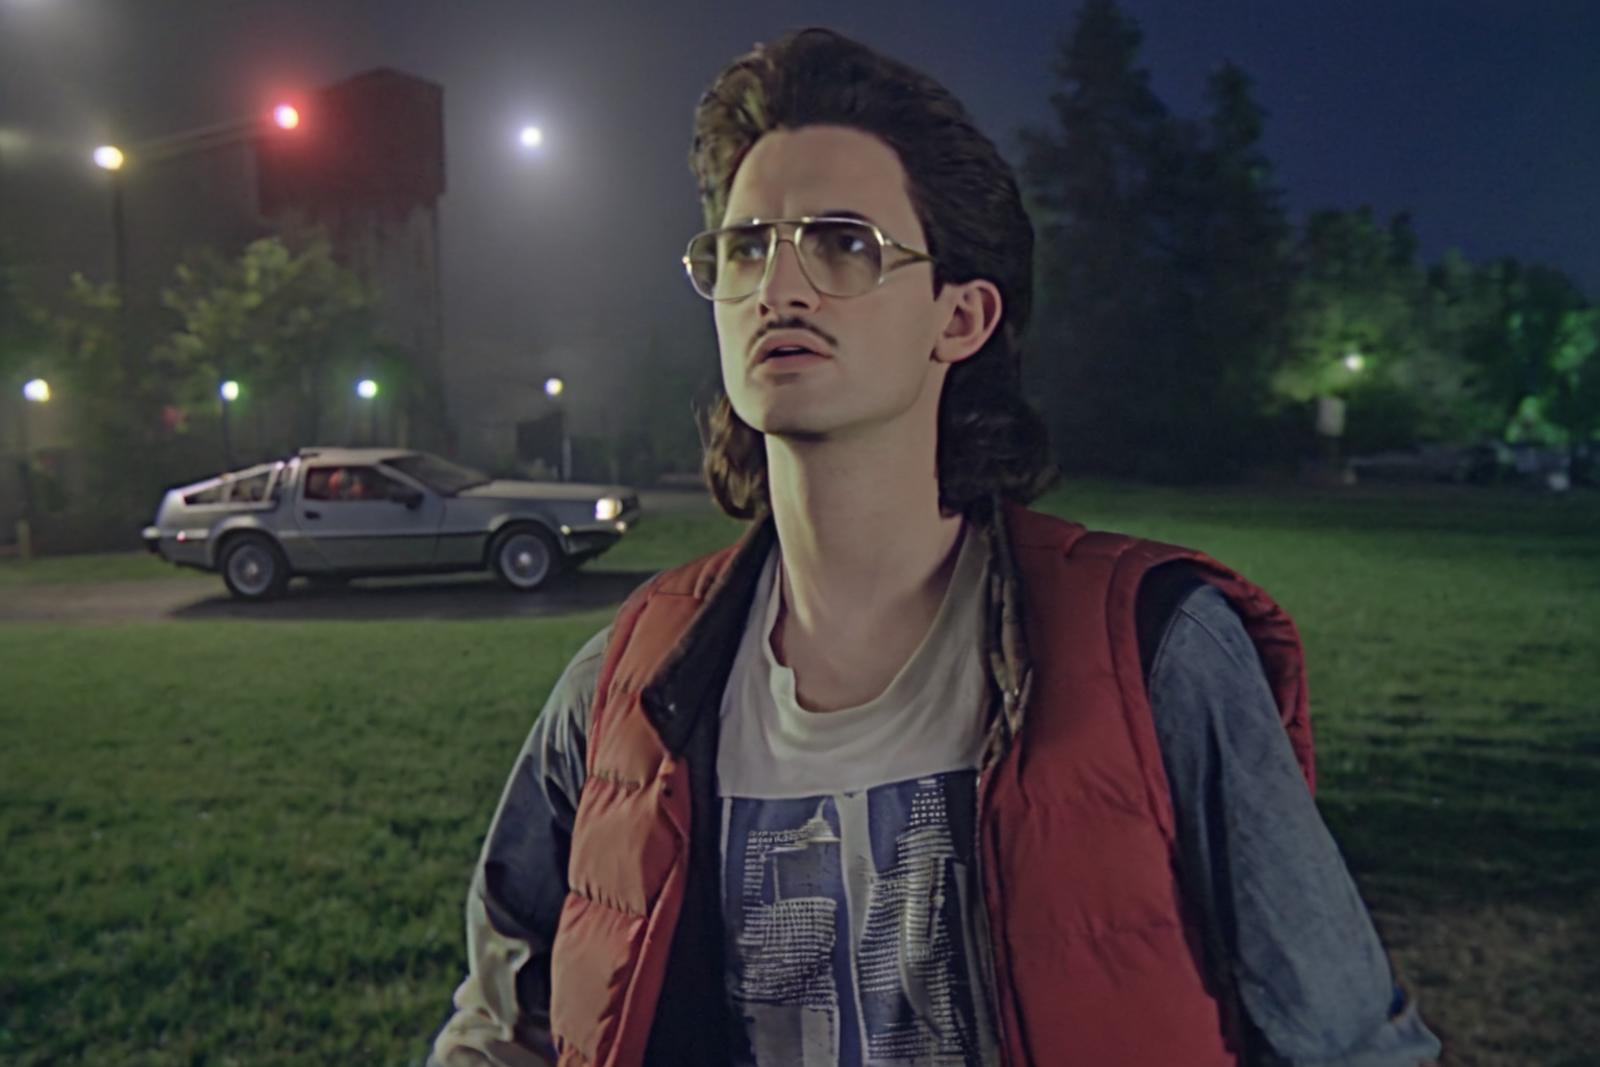 A man wearing glasses and a red vest standing next to a DeLorean.